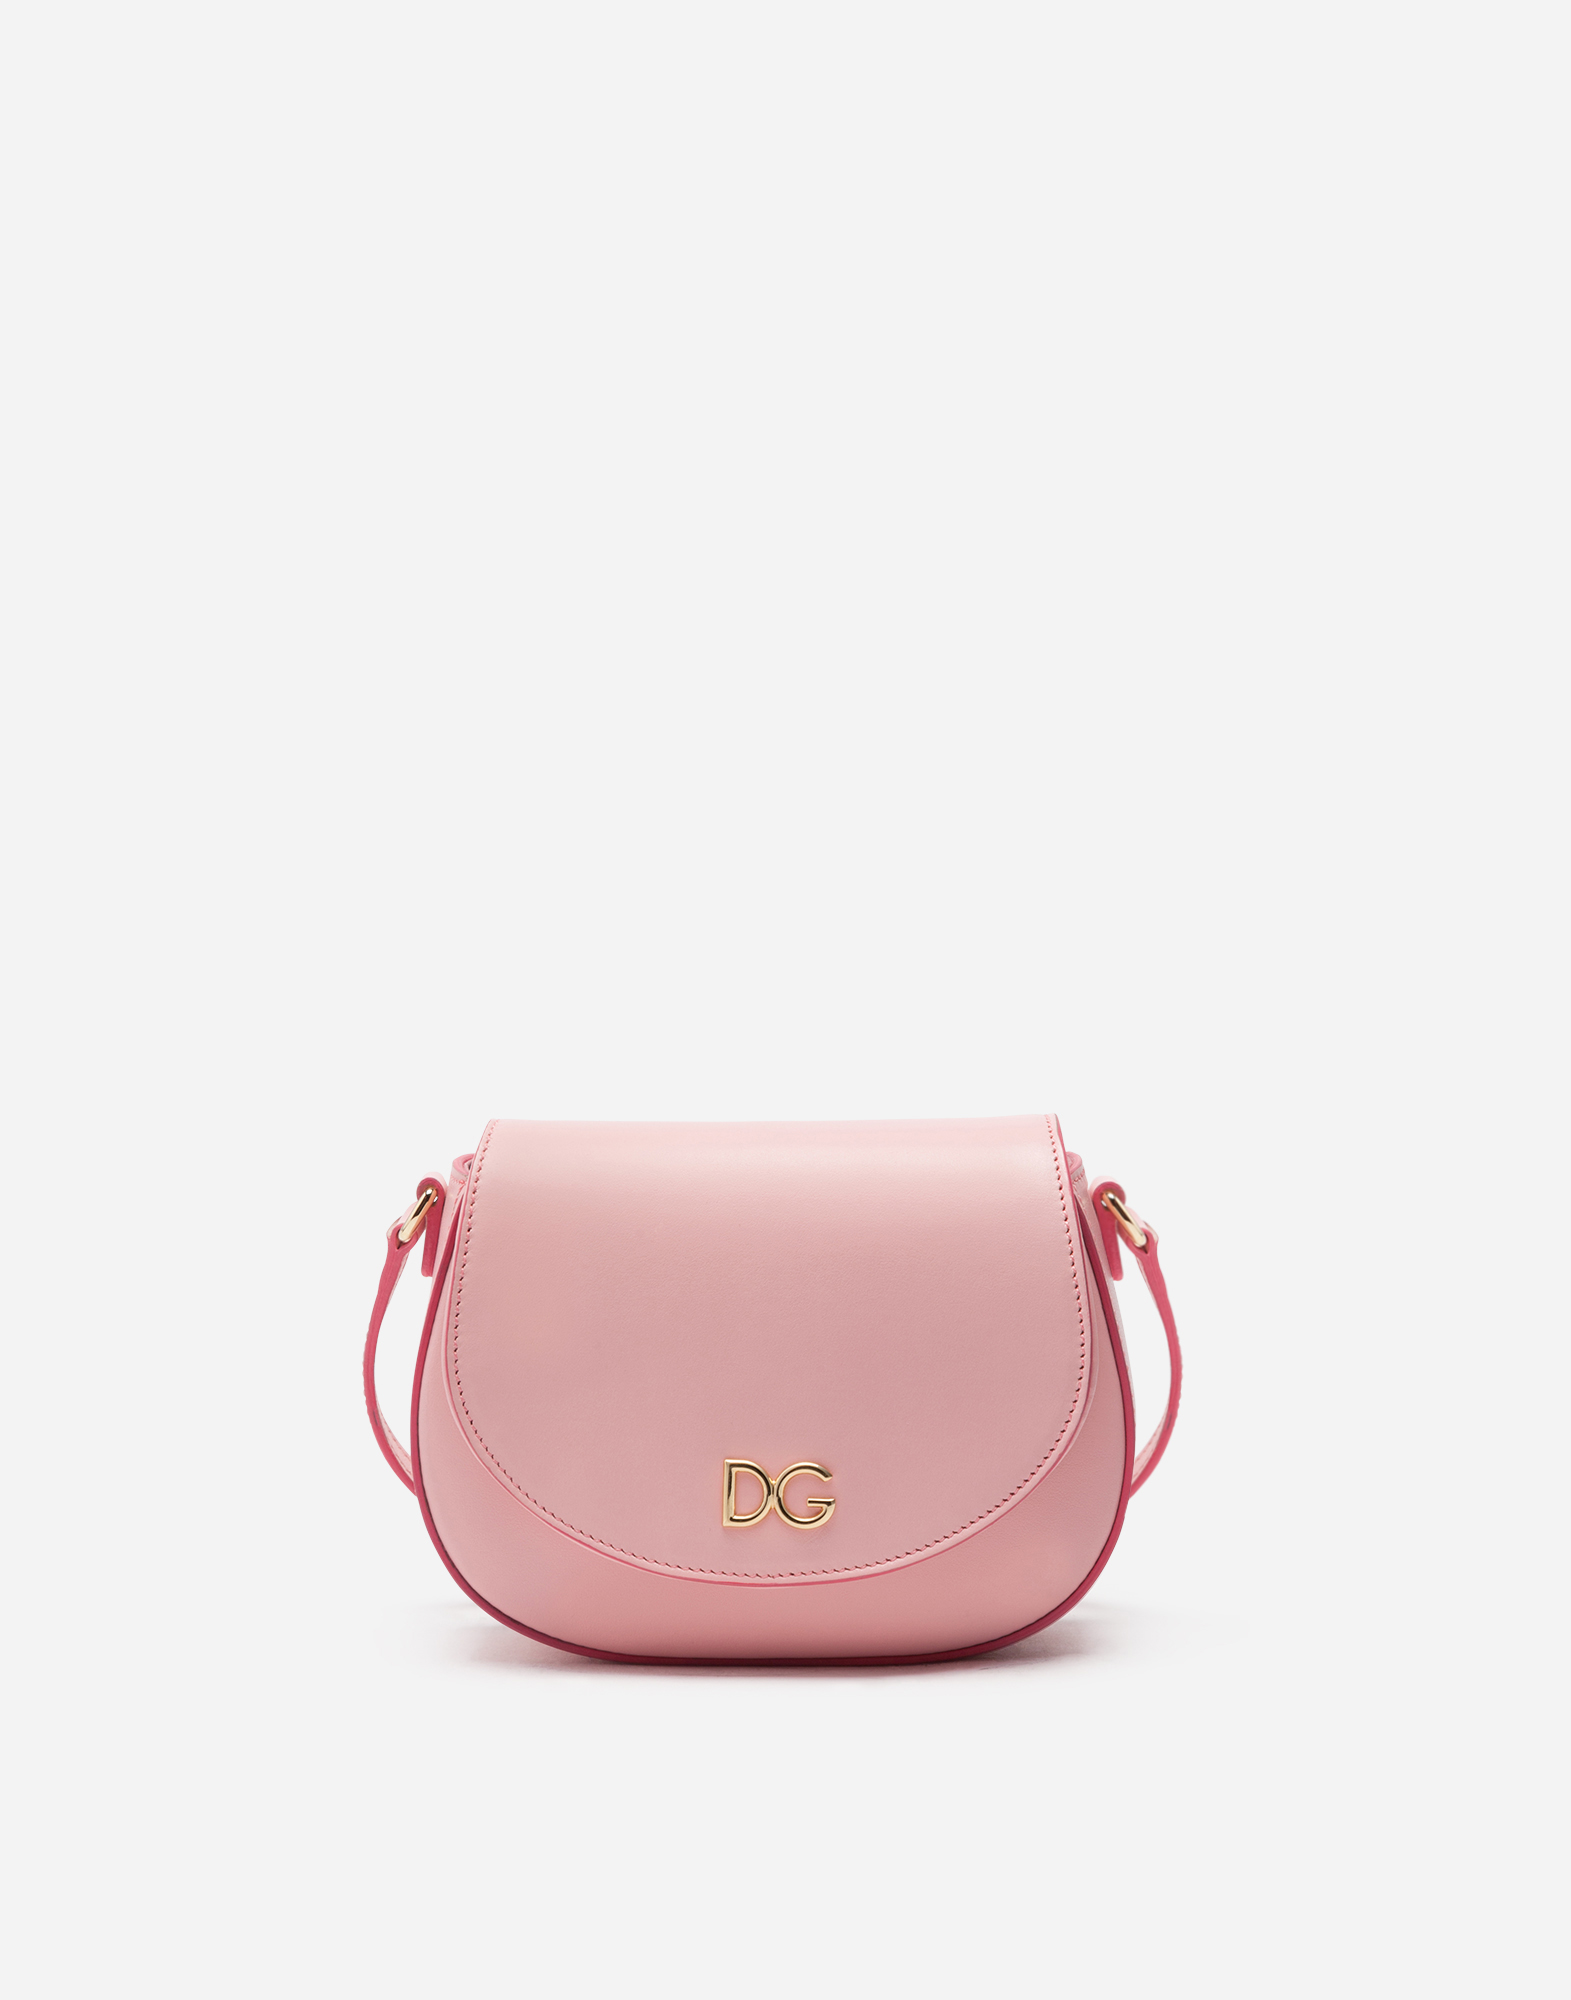 Calfskin leather side bag with DG logo in Pink